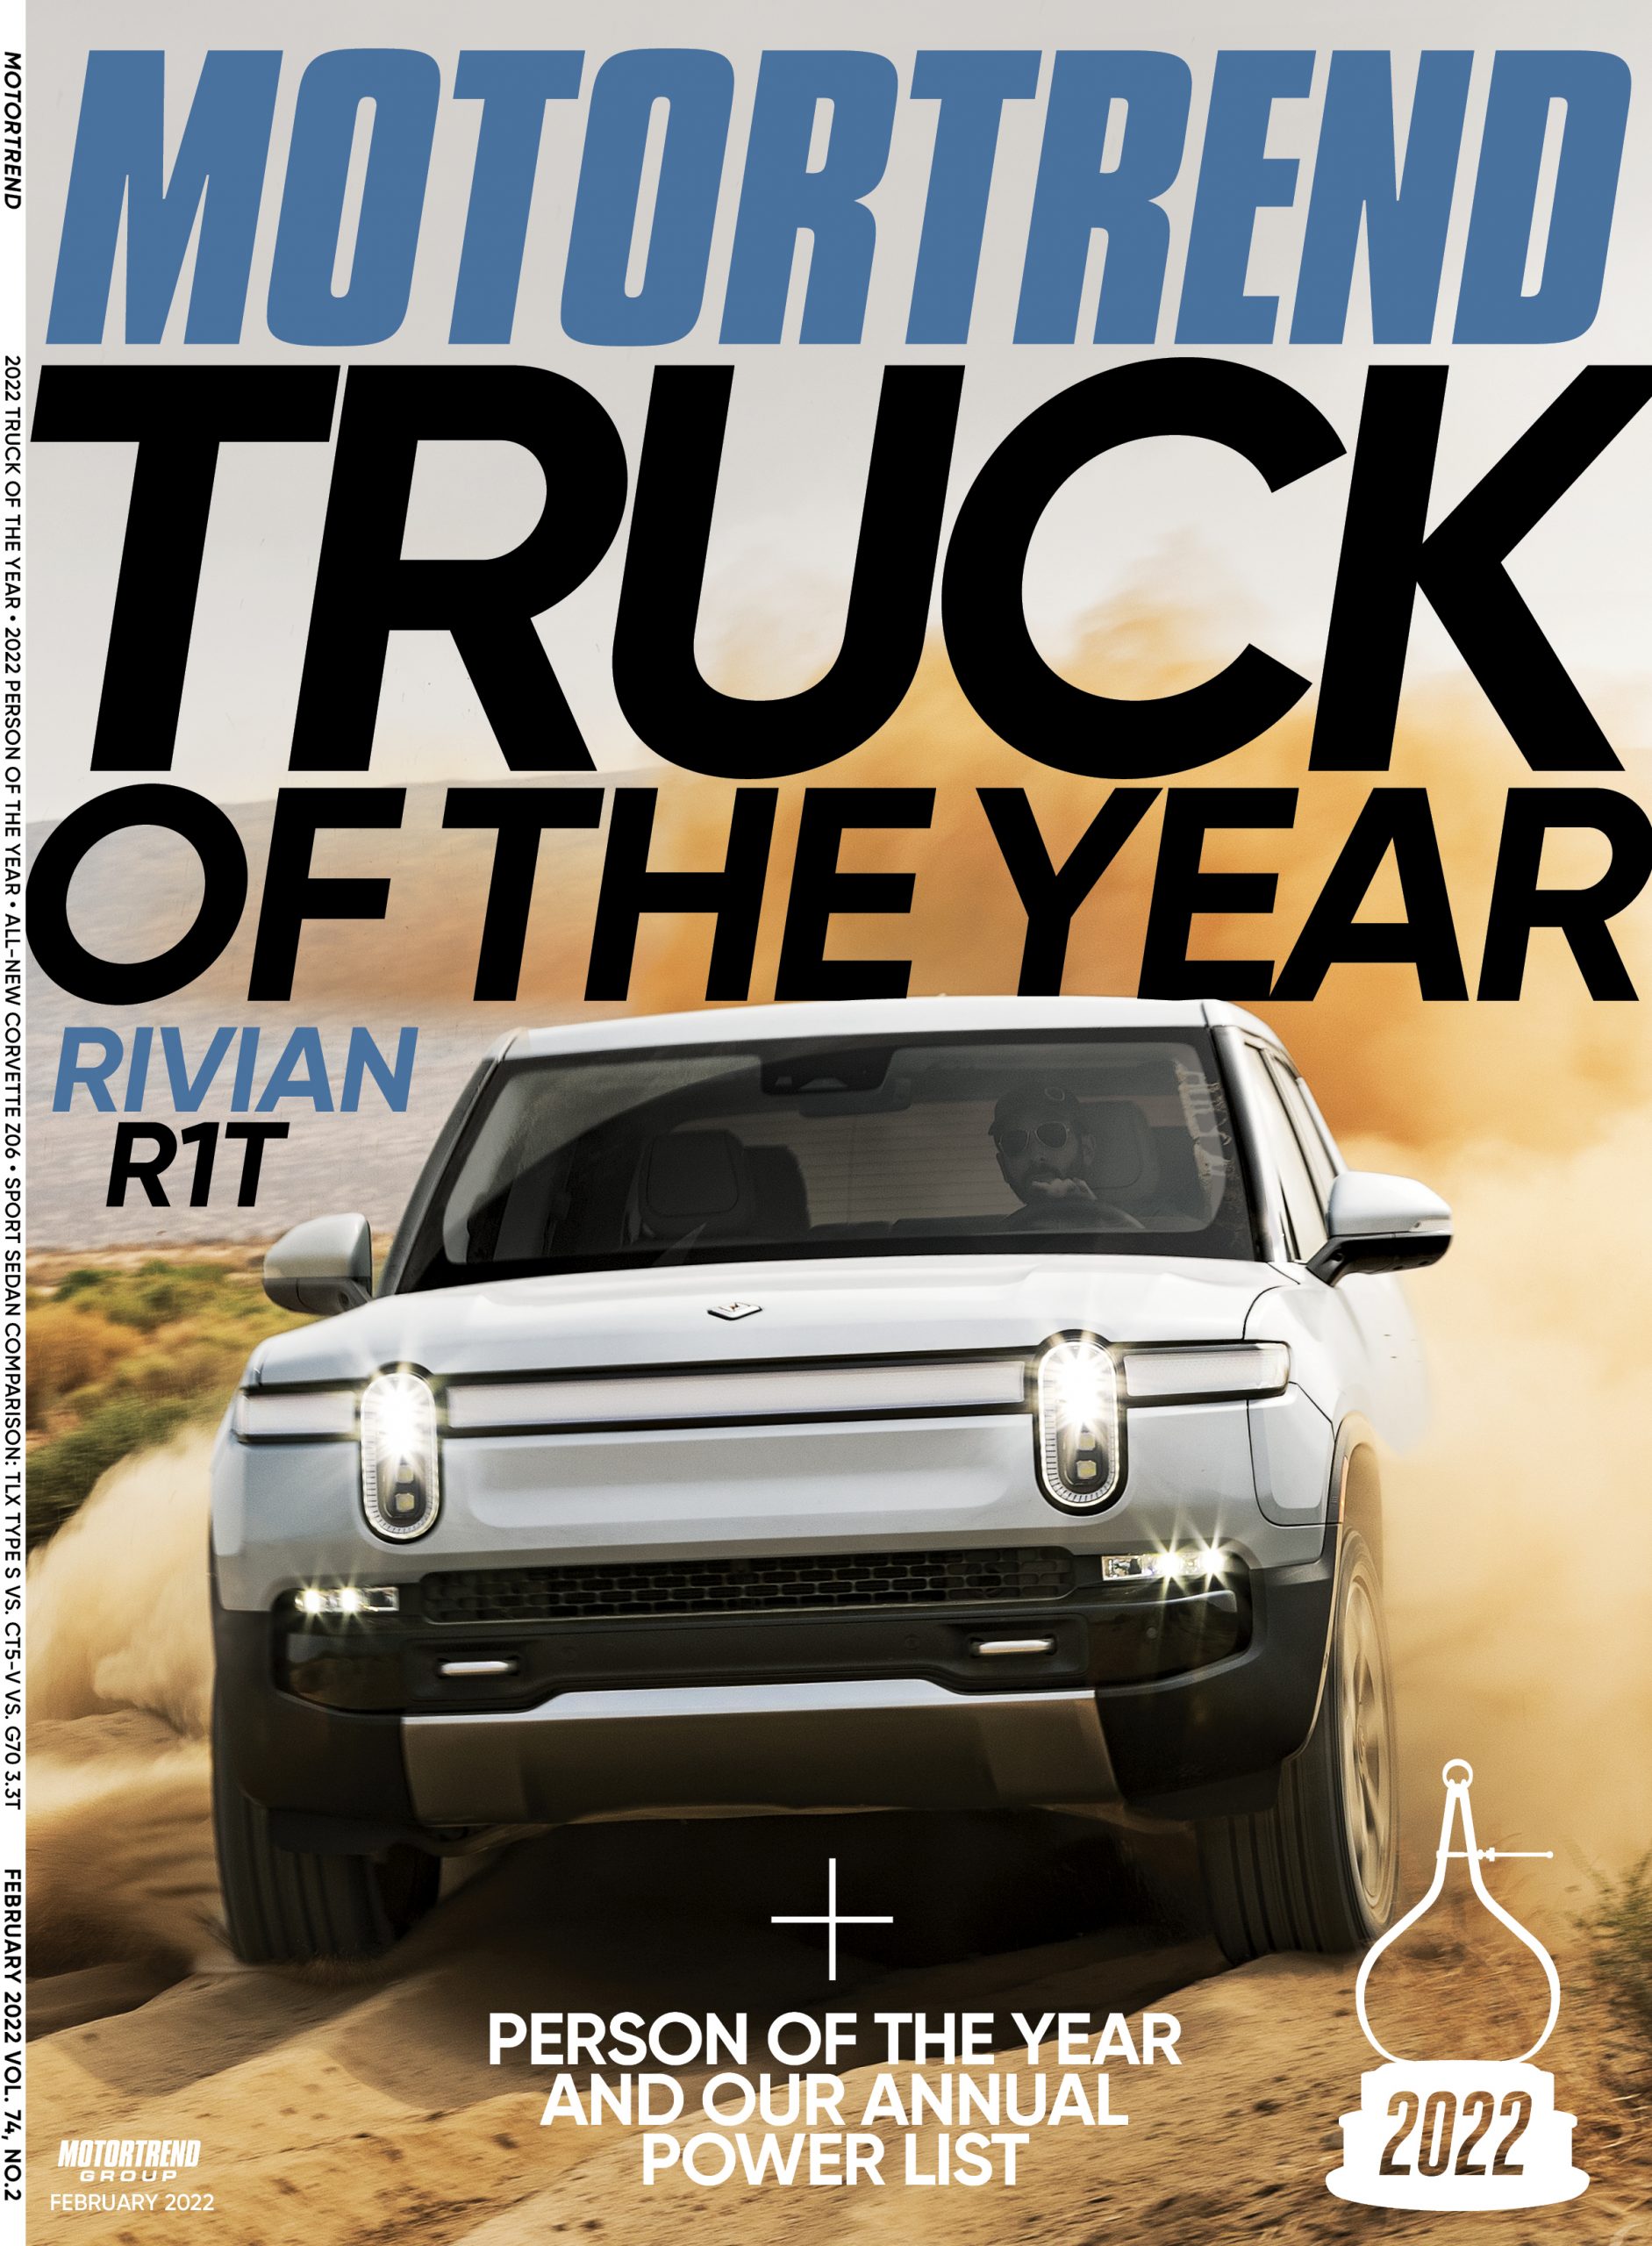 MotorTrend Names Rivian R1T as the 2022 ...